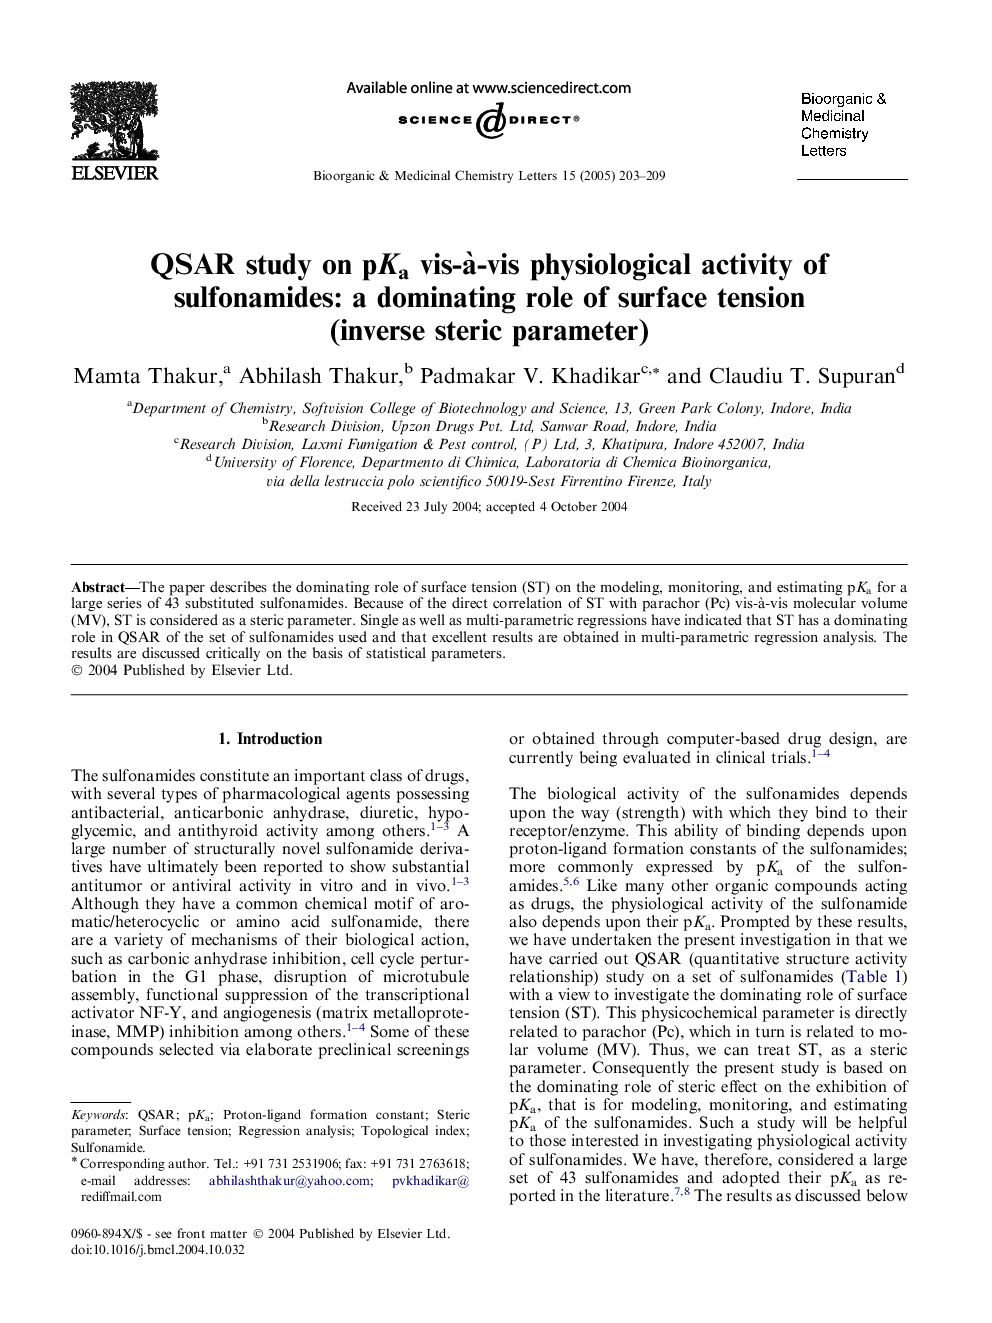 QSAR study on pKa vis-Ã -vis physiological activity of sulfonamides: a dominating role of surface tension (inverse steric parameter)